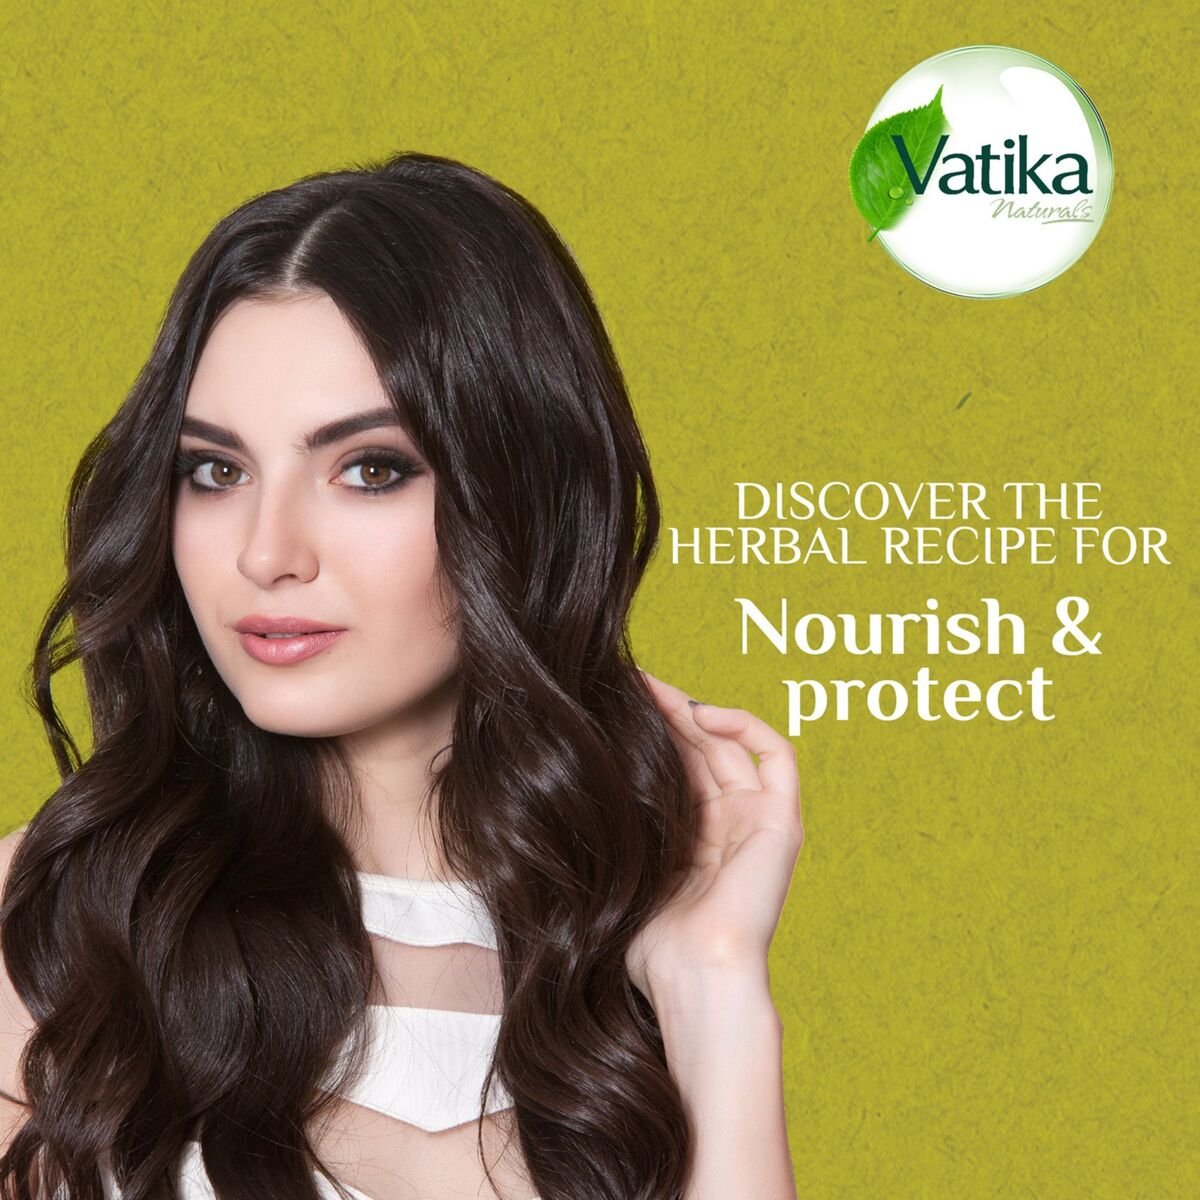 Vatika Naturals Nourish & Protect Conditioner Enriched With Olive & Henna 400 ml